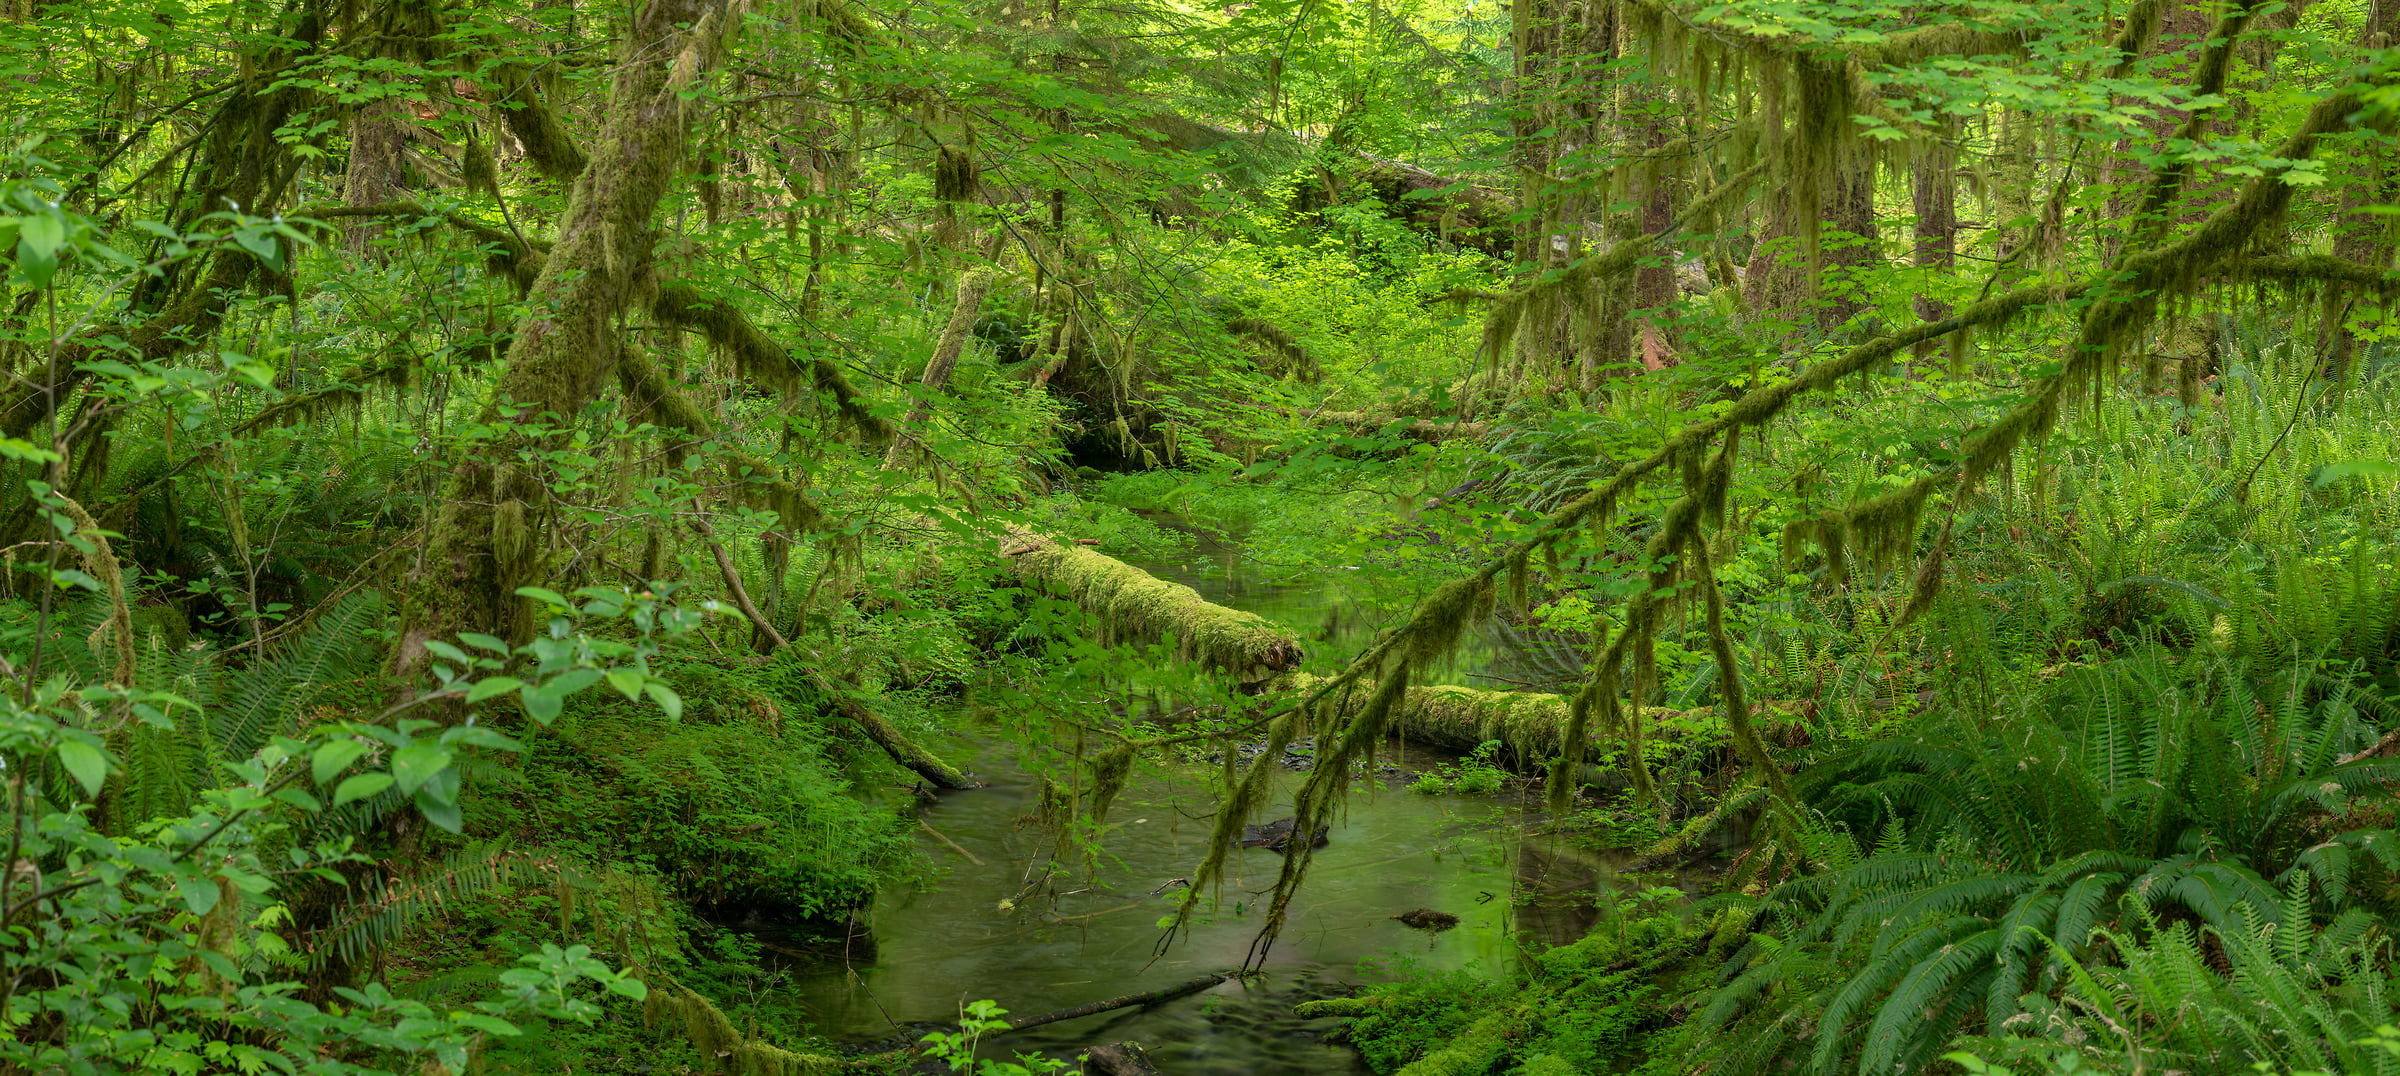 238 megapixels! A very high resolution, large-format VAST photo print of a lush green jungle; nature photograph created by Greg Probst in Hoh Rainforest, Olympic National Park, Washington